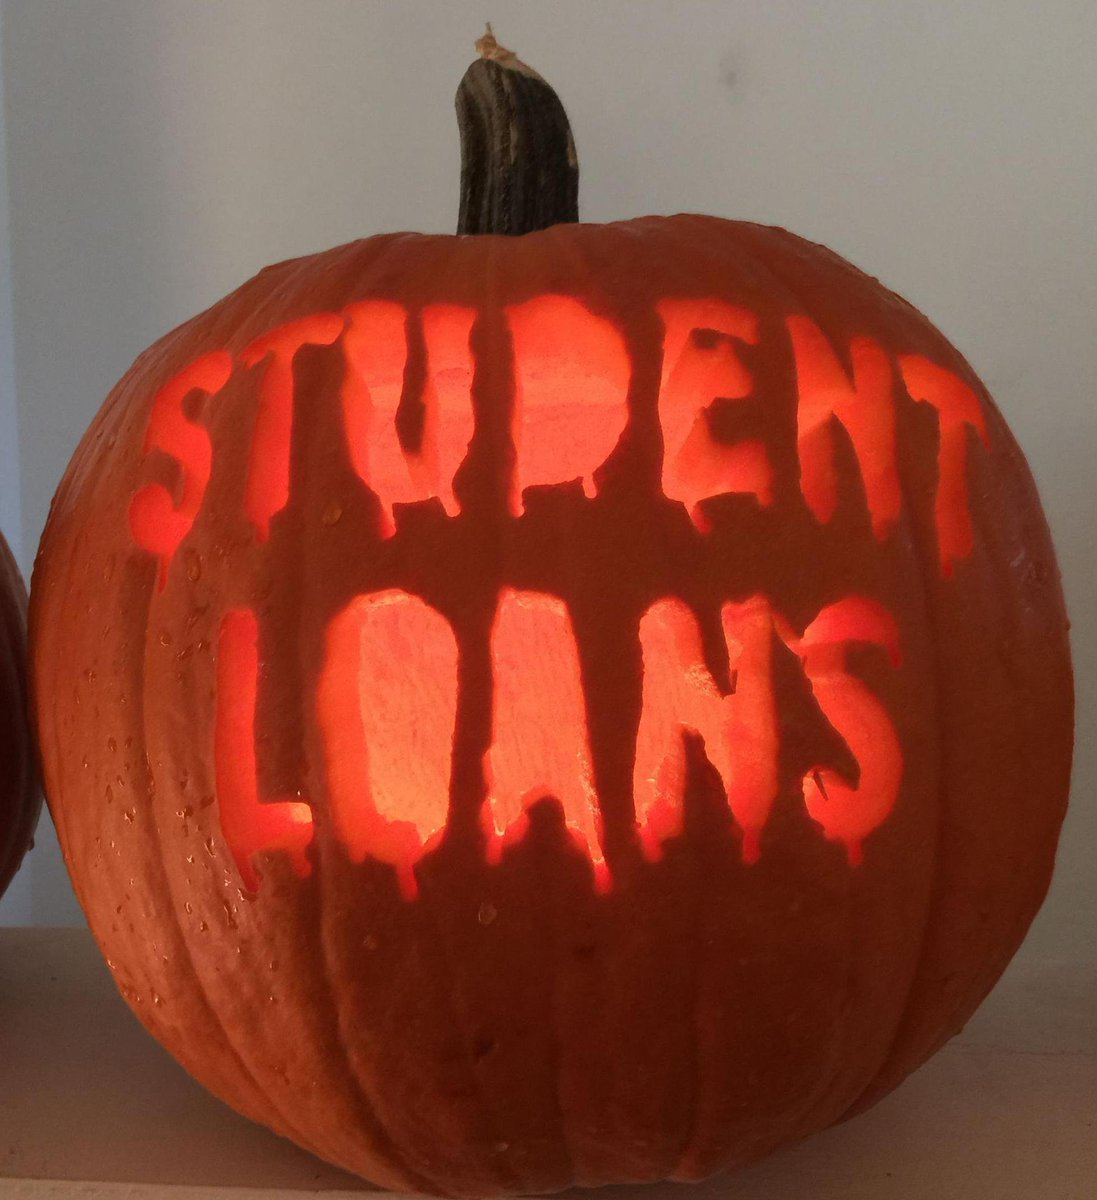 The best way to spook students and adults this Halloween